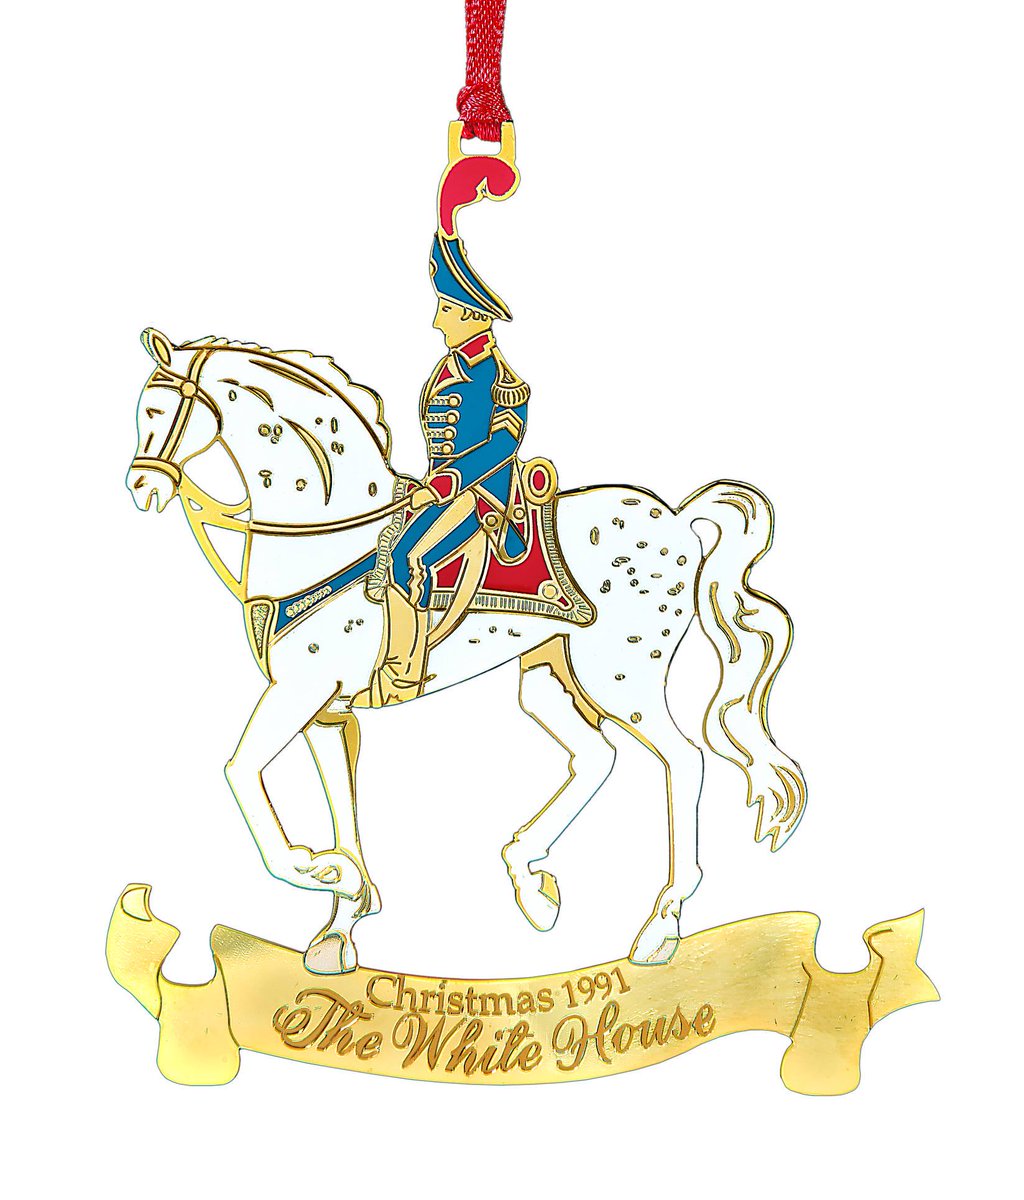 The 1991 ornament honors President William Henry Harrison. The president is depicted riding his white charger on the way to the Capitol to take the presidential oath of office. Harrison would pass away one month after his inauguration. https://shop.whitehousehistory.org/holidays/ornaments/1990-1993-four-white-hour-ornaments-sold-as-a-set